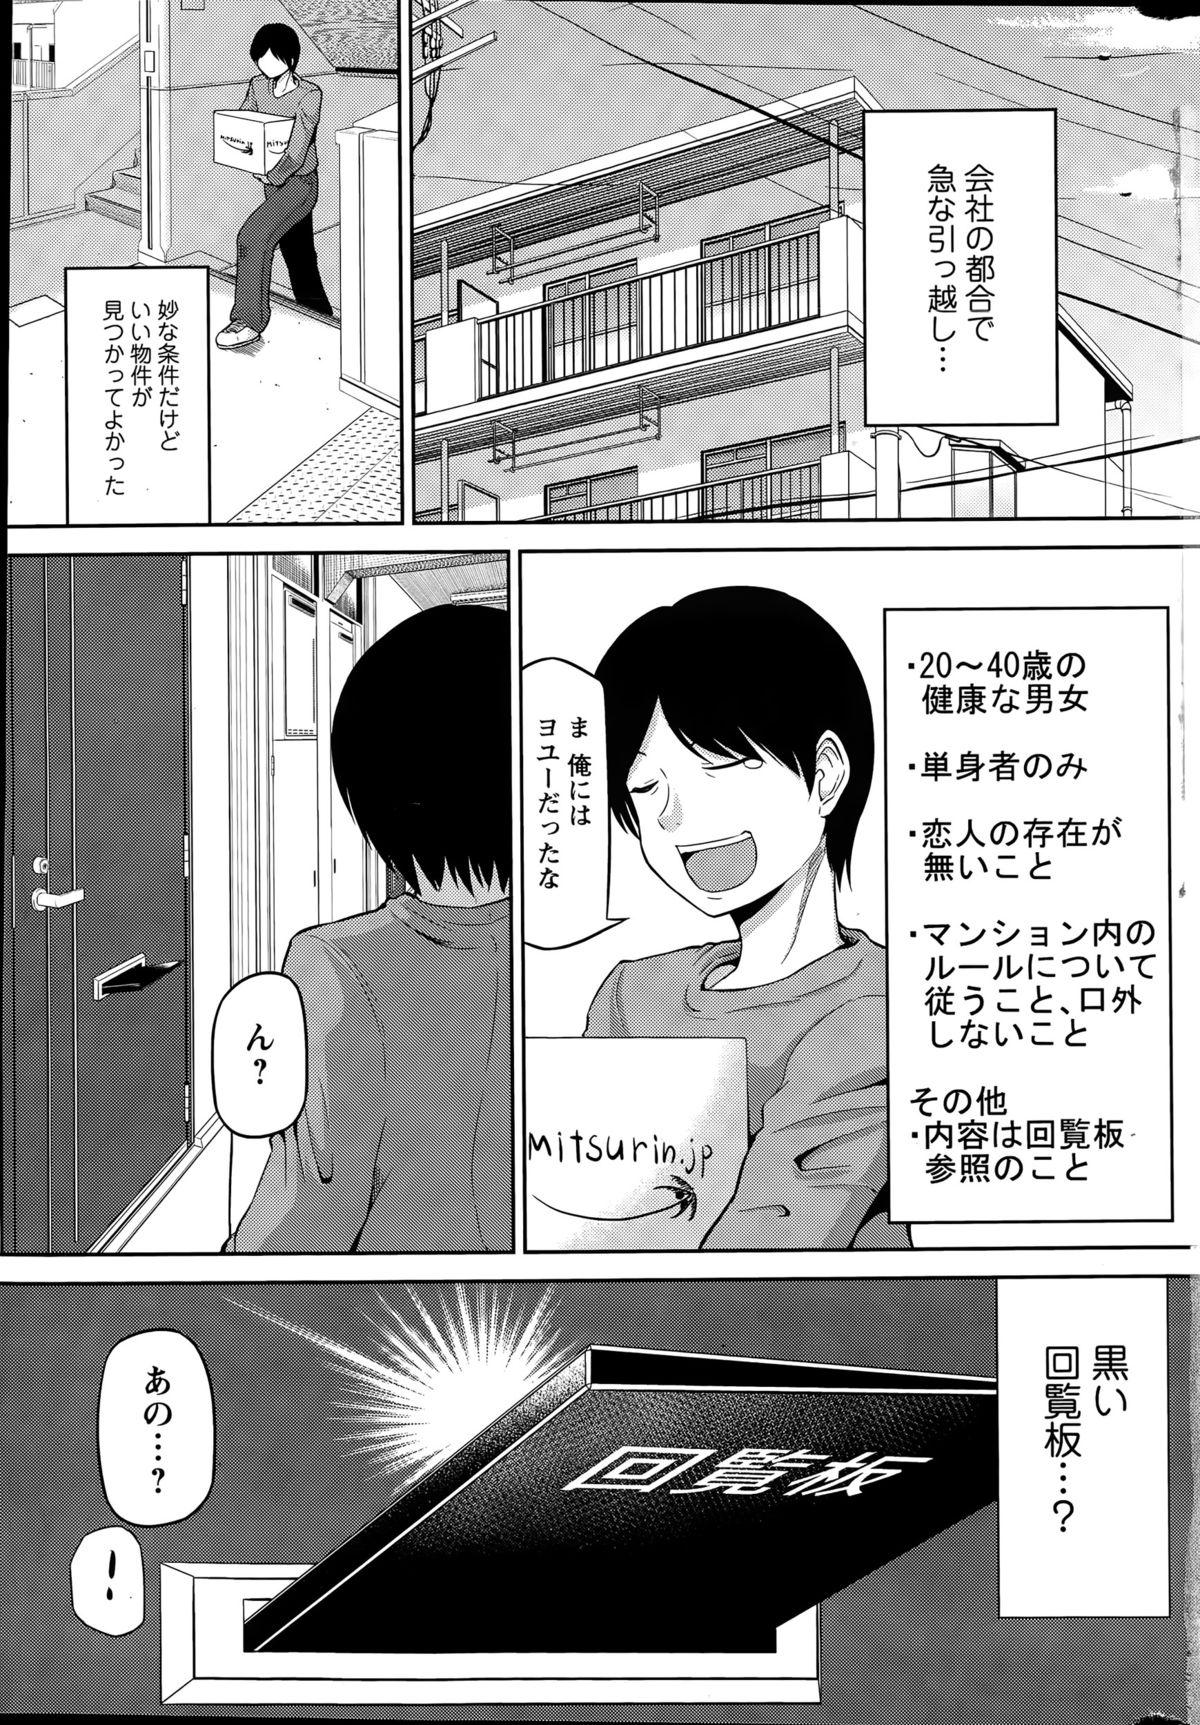 Cheating Action Pizazz DX 2015-06 Female - Page 7